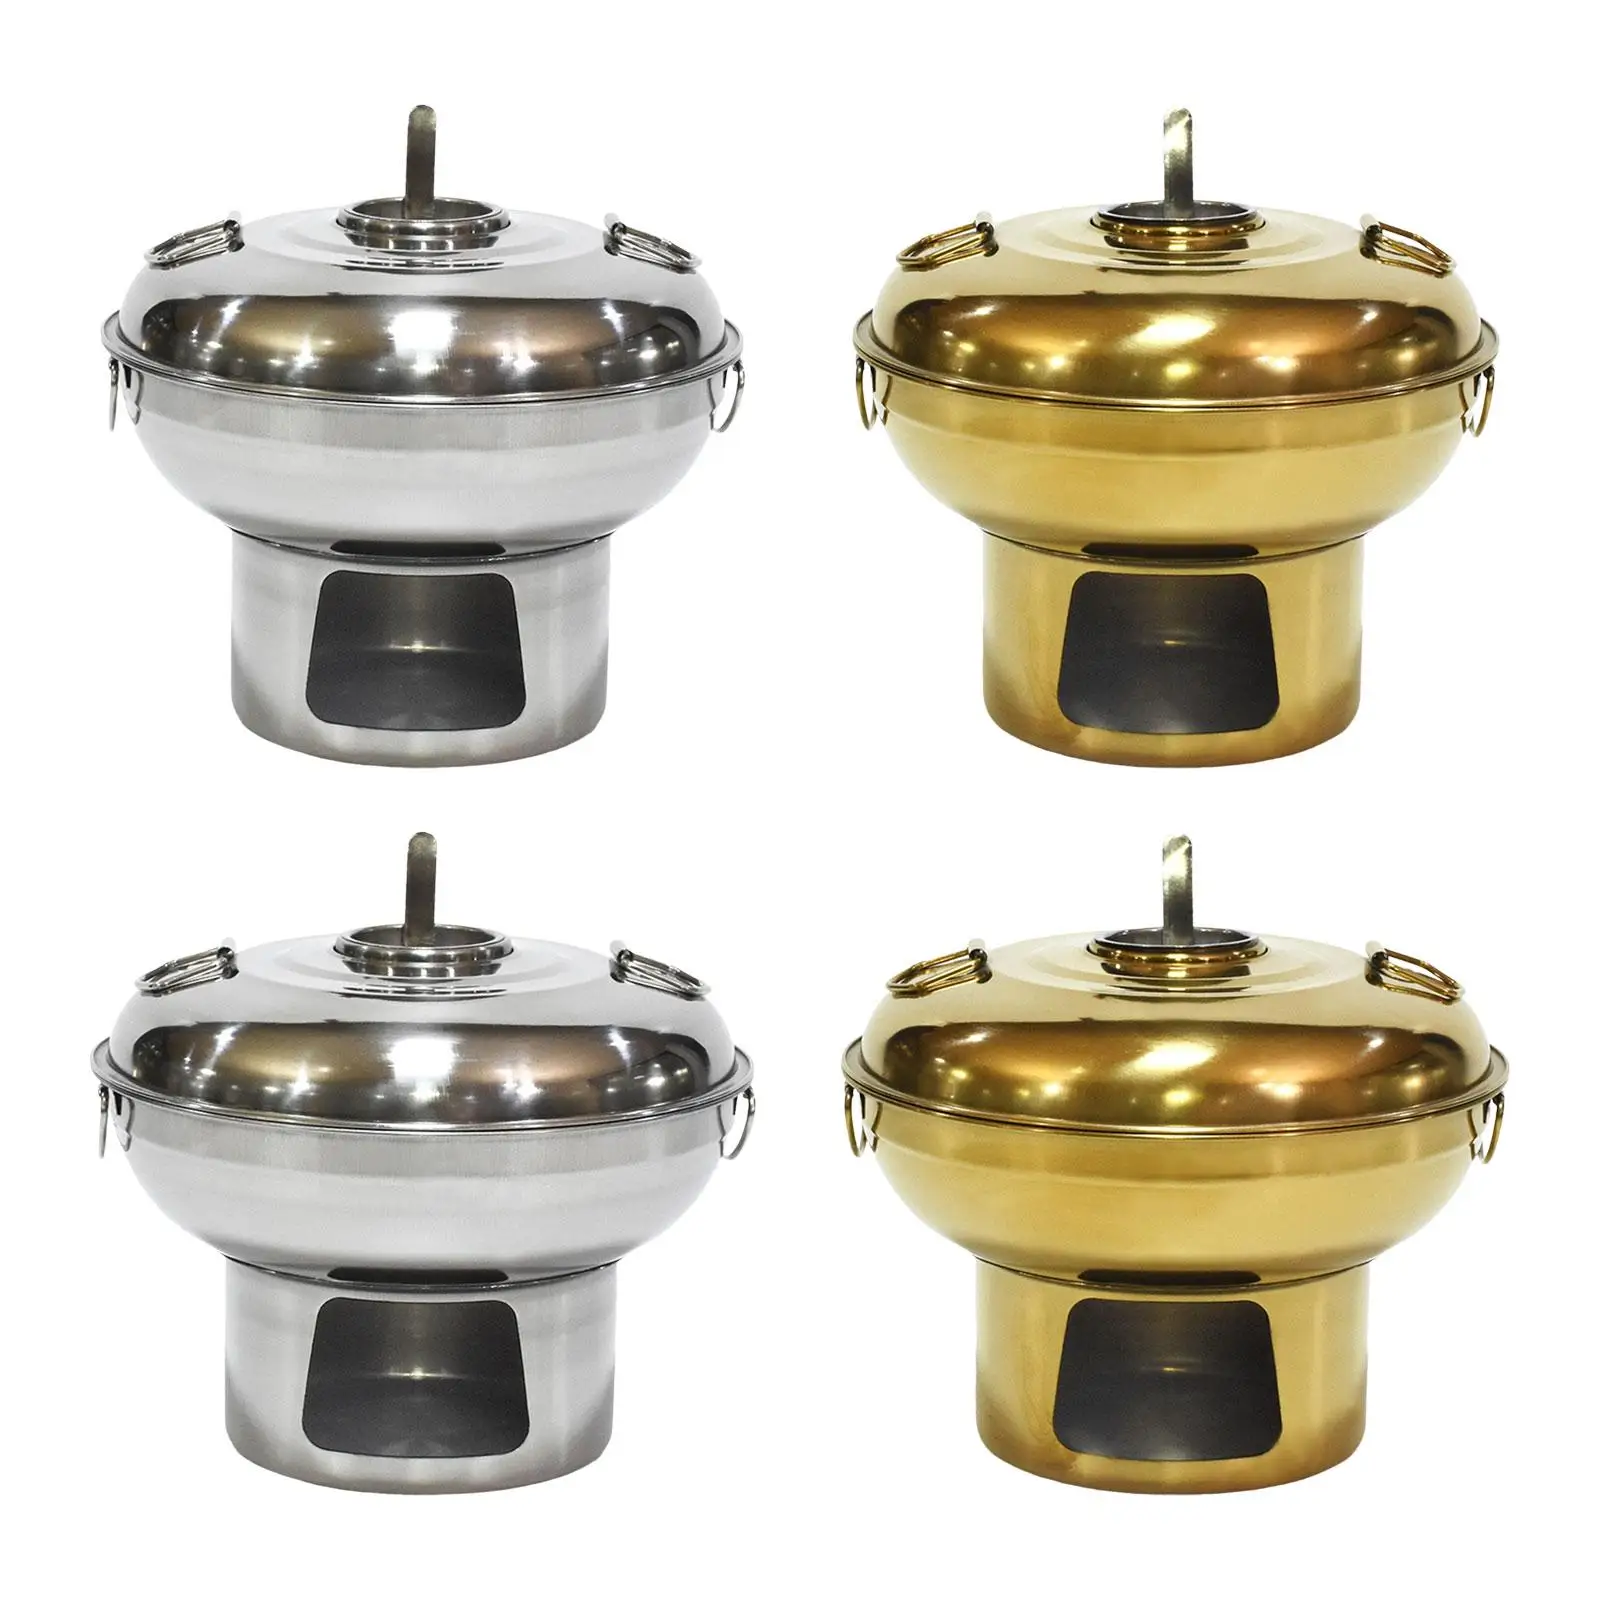 Small Hot Pot Single Person Small Hotpot Stockpot Milk Tea Hot Outdoor Cooker Traditional Chinese Hot Pot for Picnic